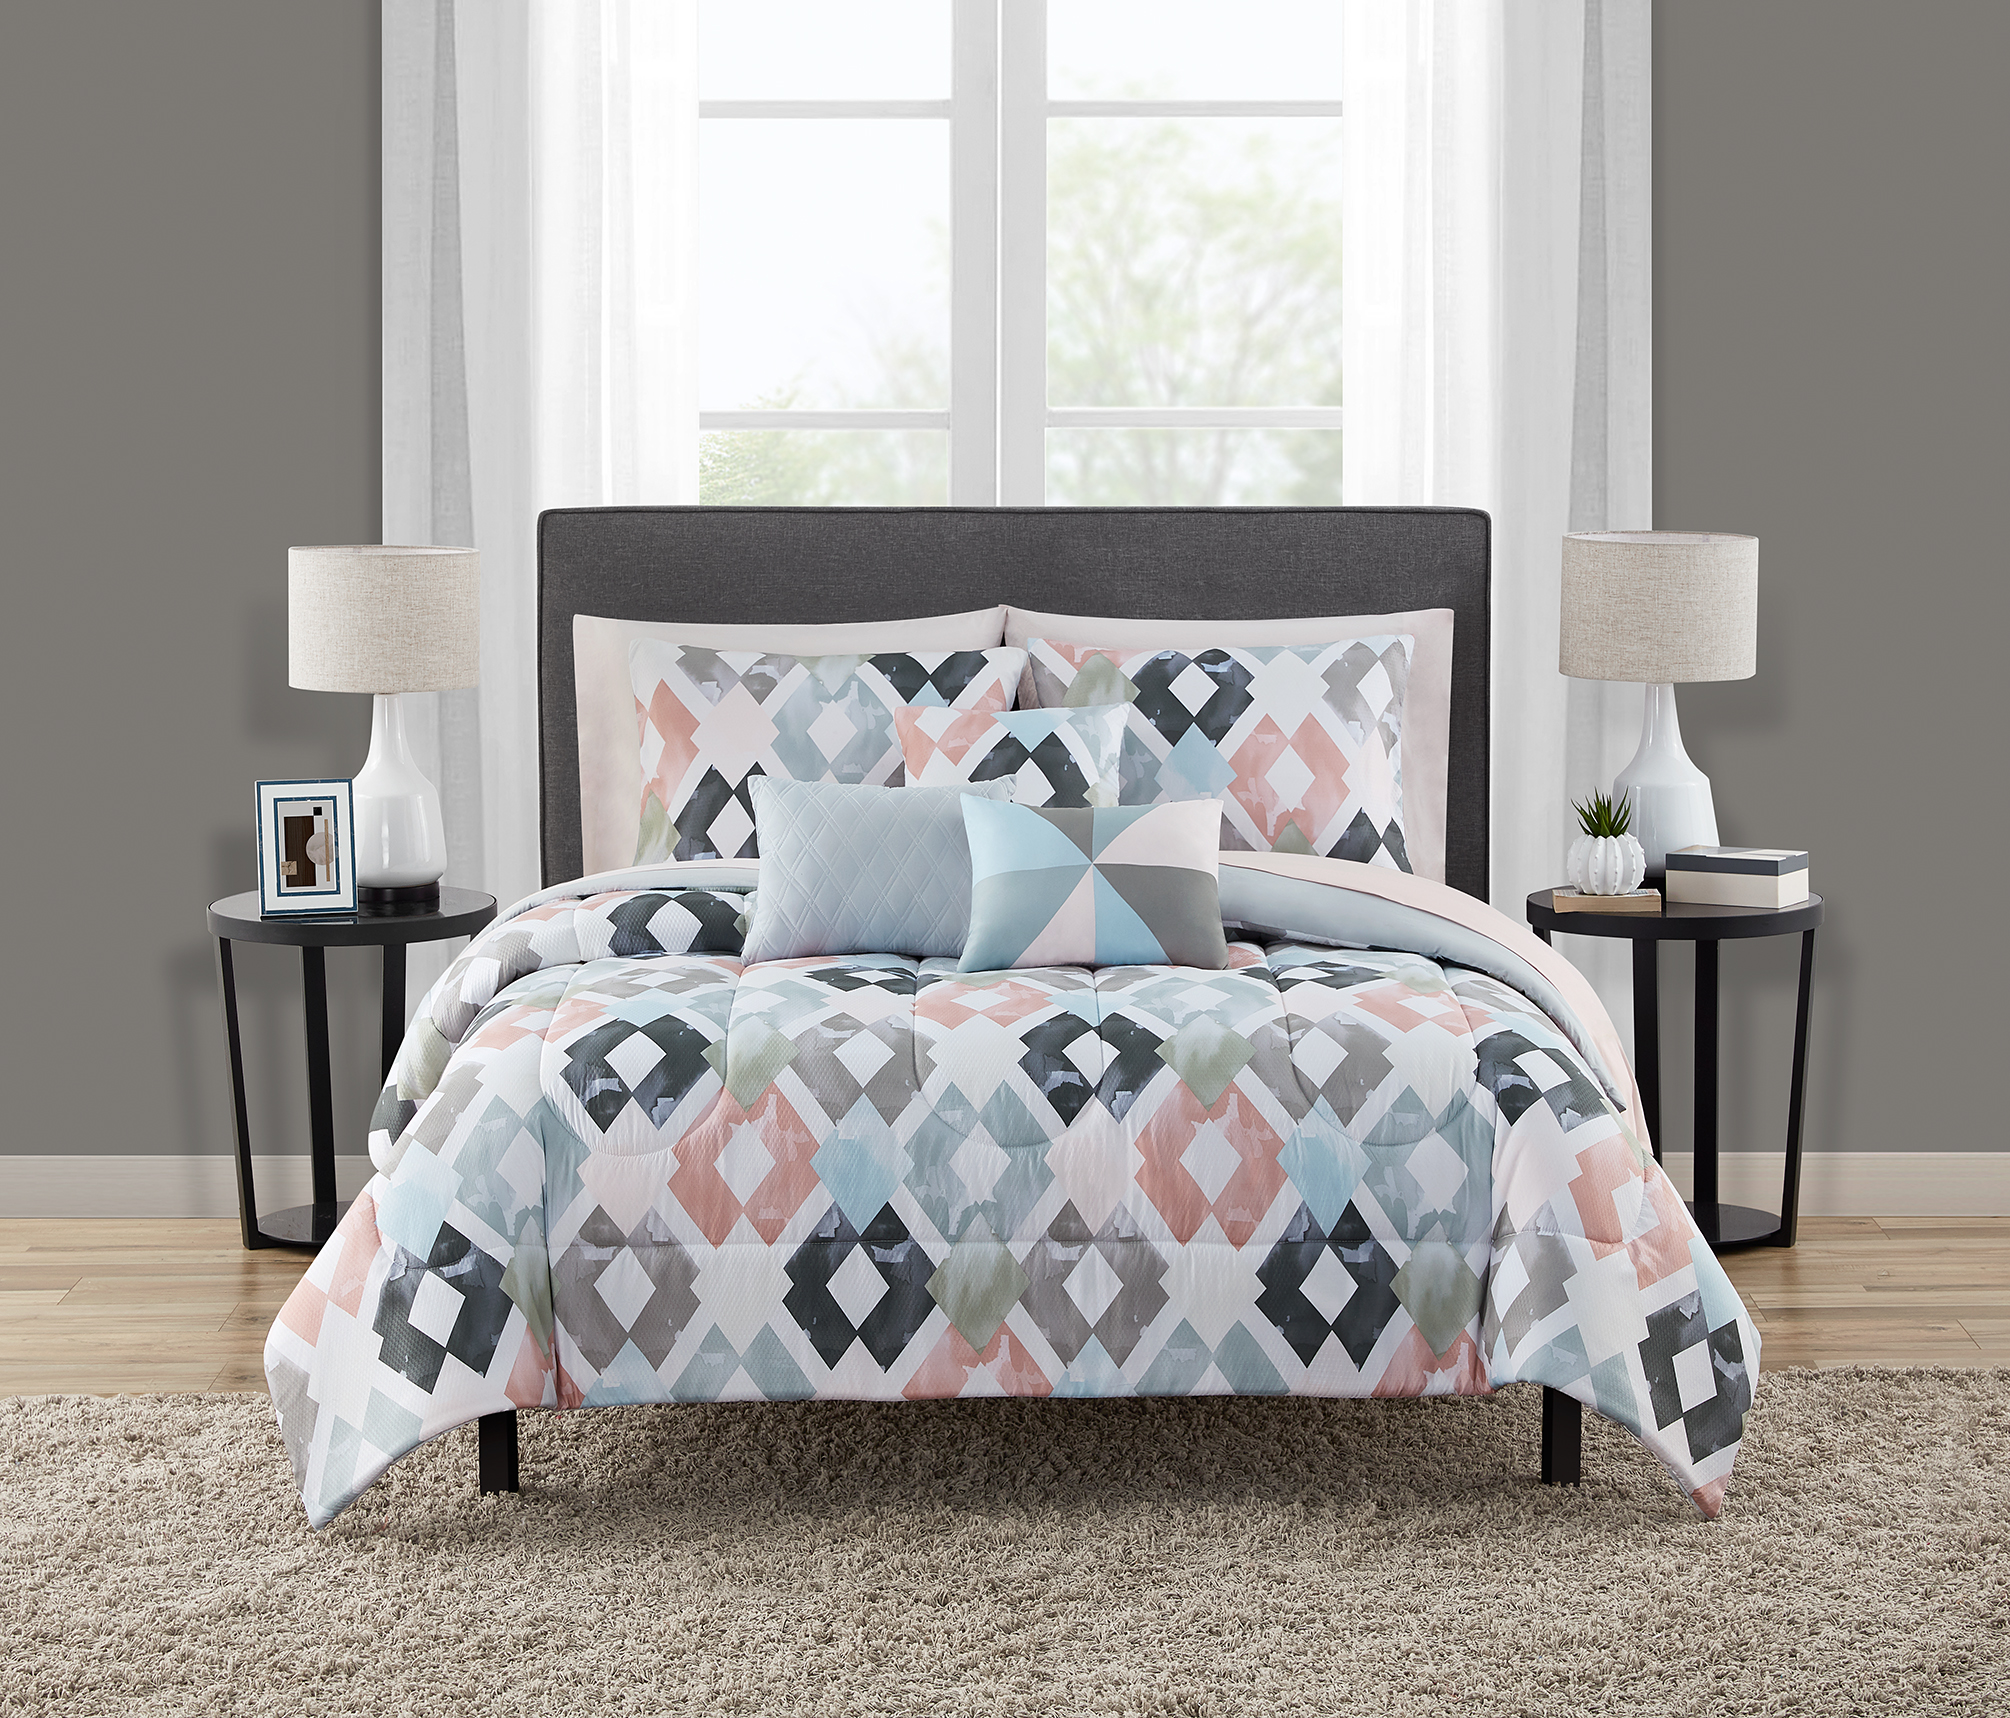 Mainstays Pink and Teal Diamond 10 Piece Bed in a Bag with 3 Dec Pillows, Full - image 1 of 7